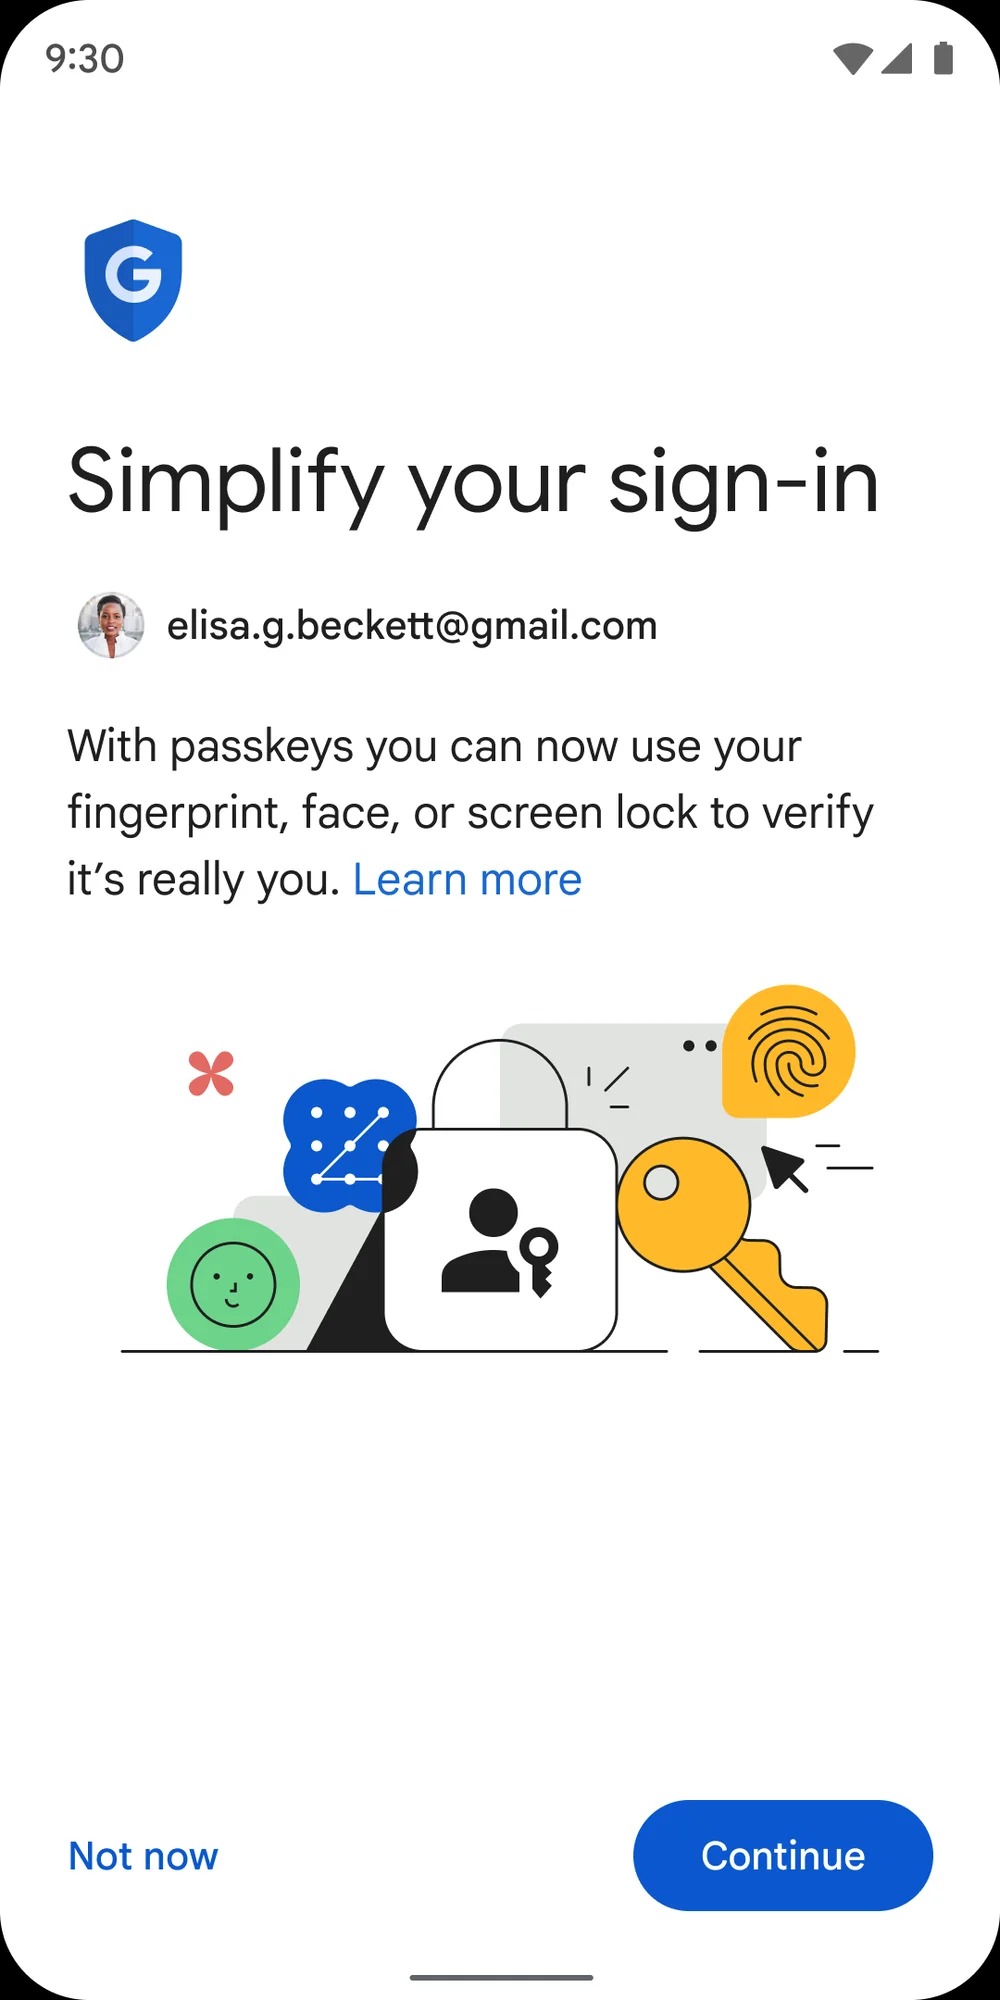 prompted to switch to passkey